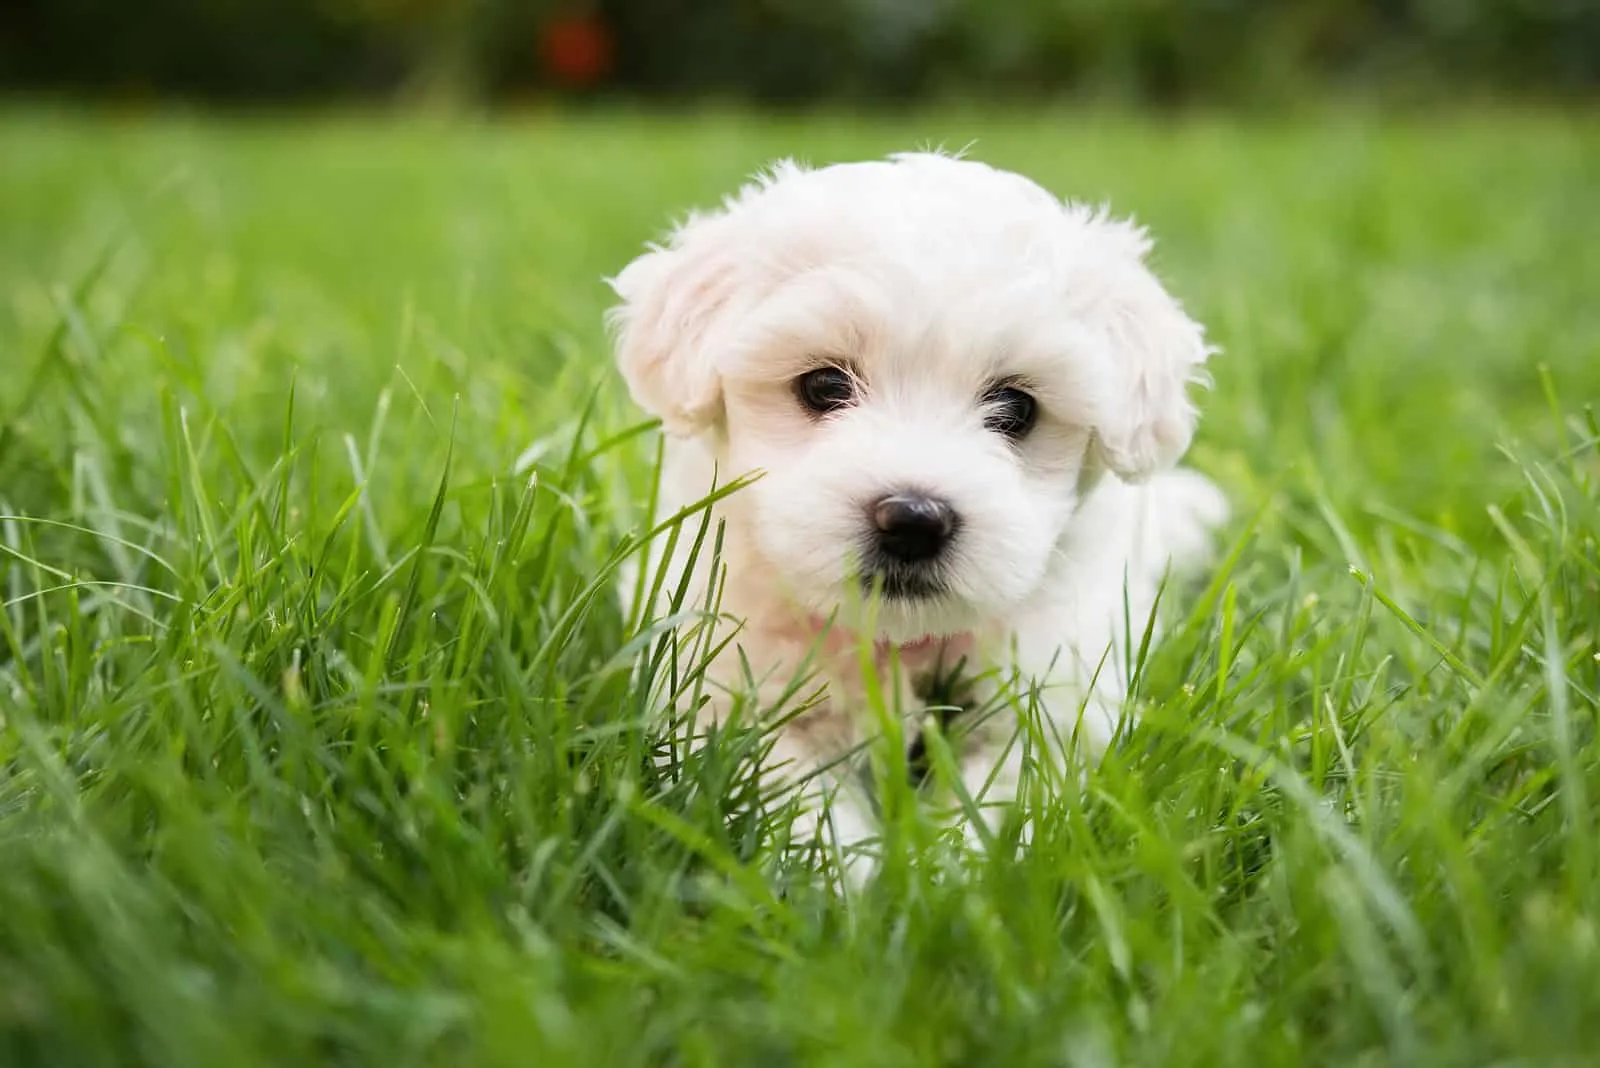 Small cute puppy of maltese dog sitting in the grass